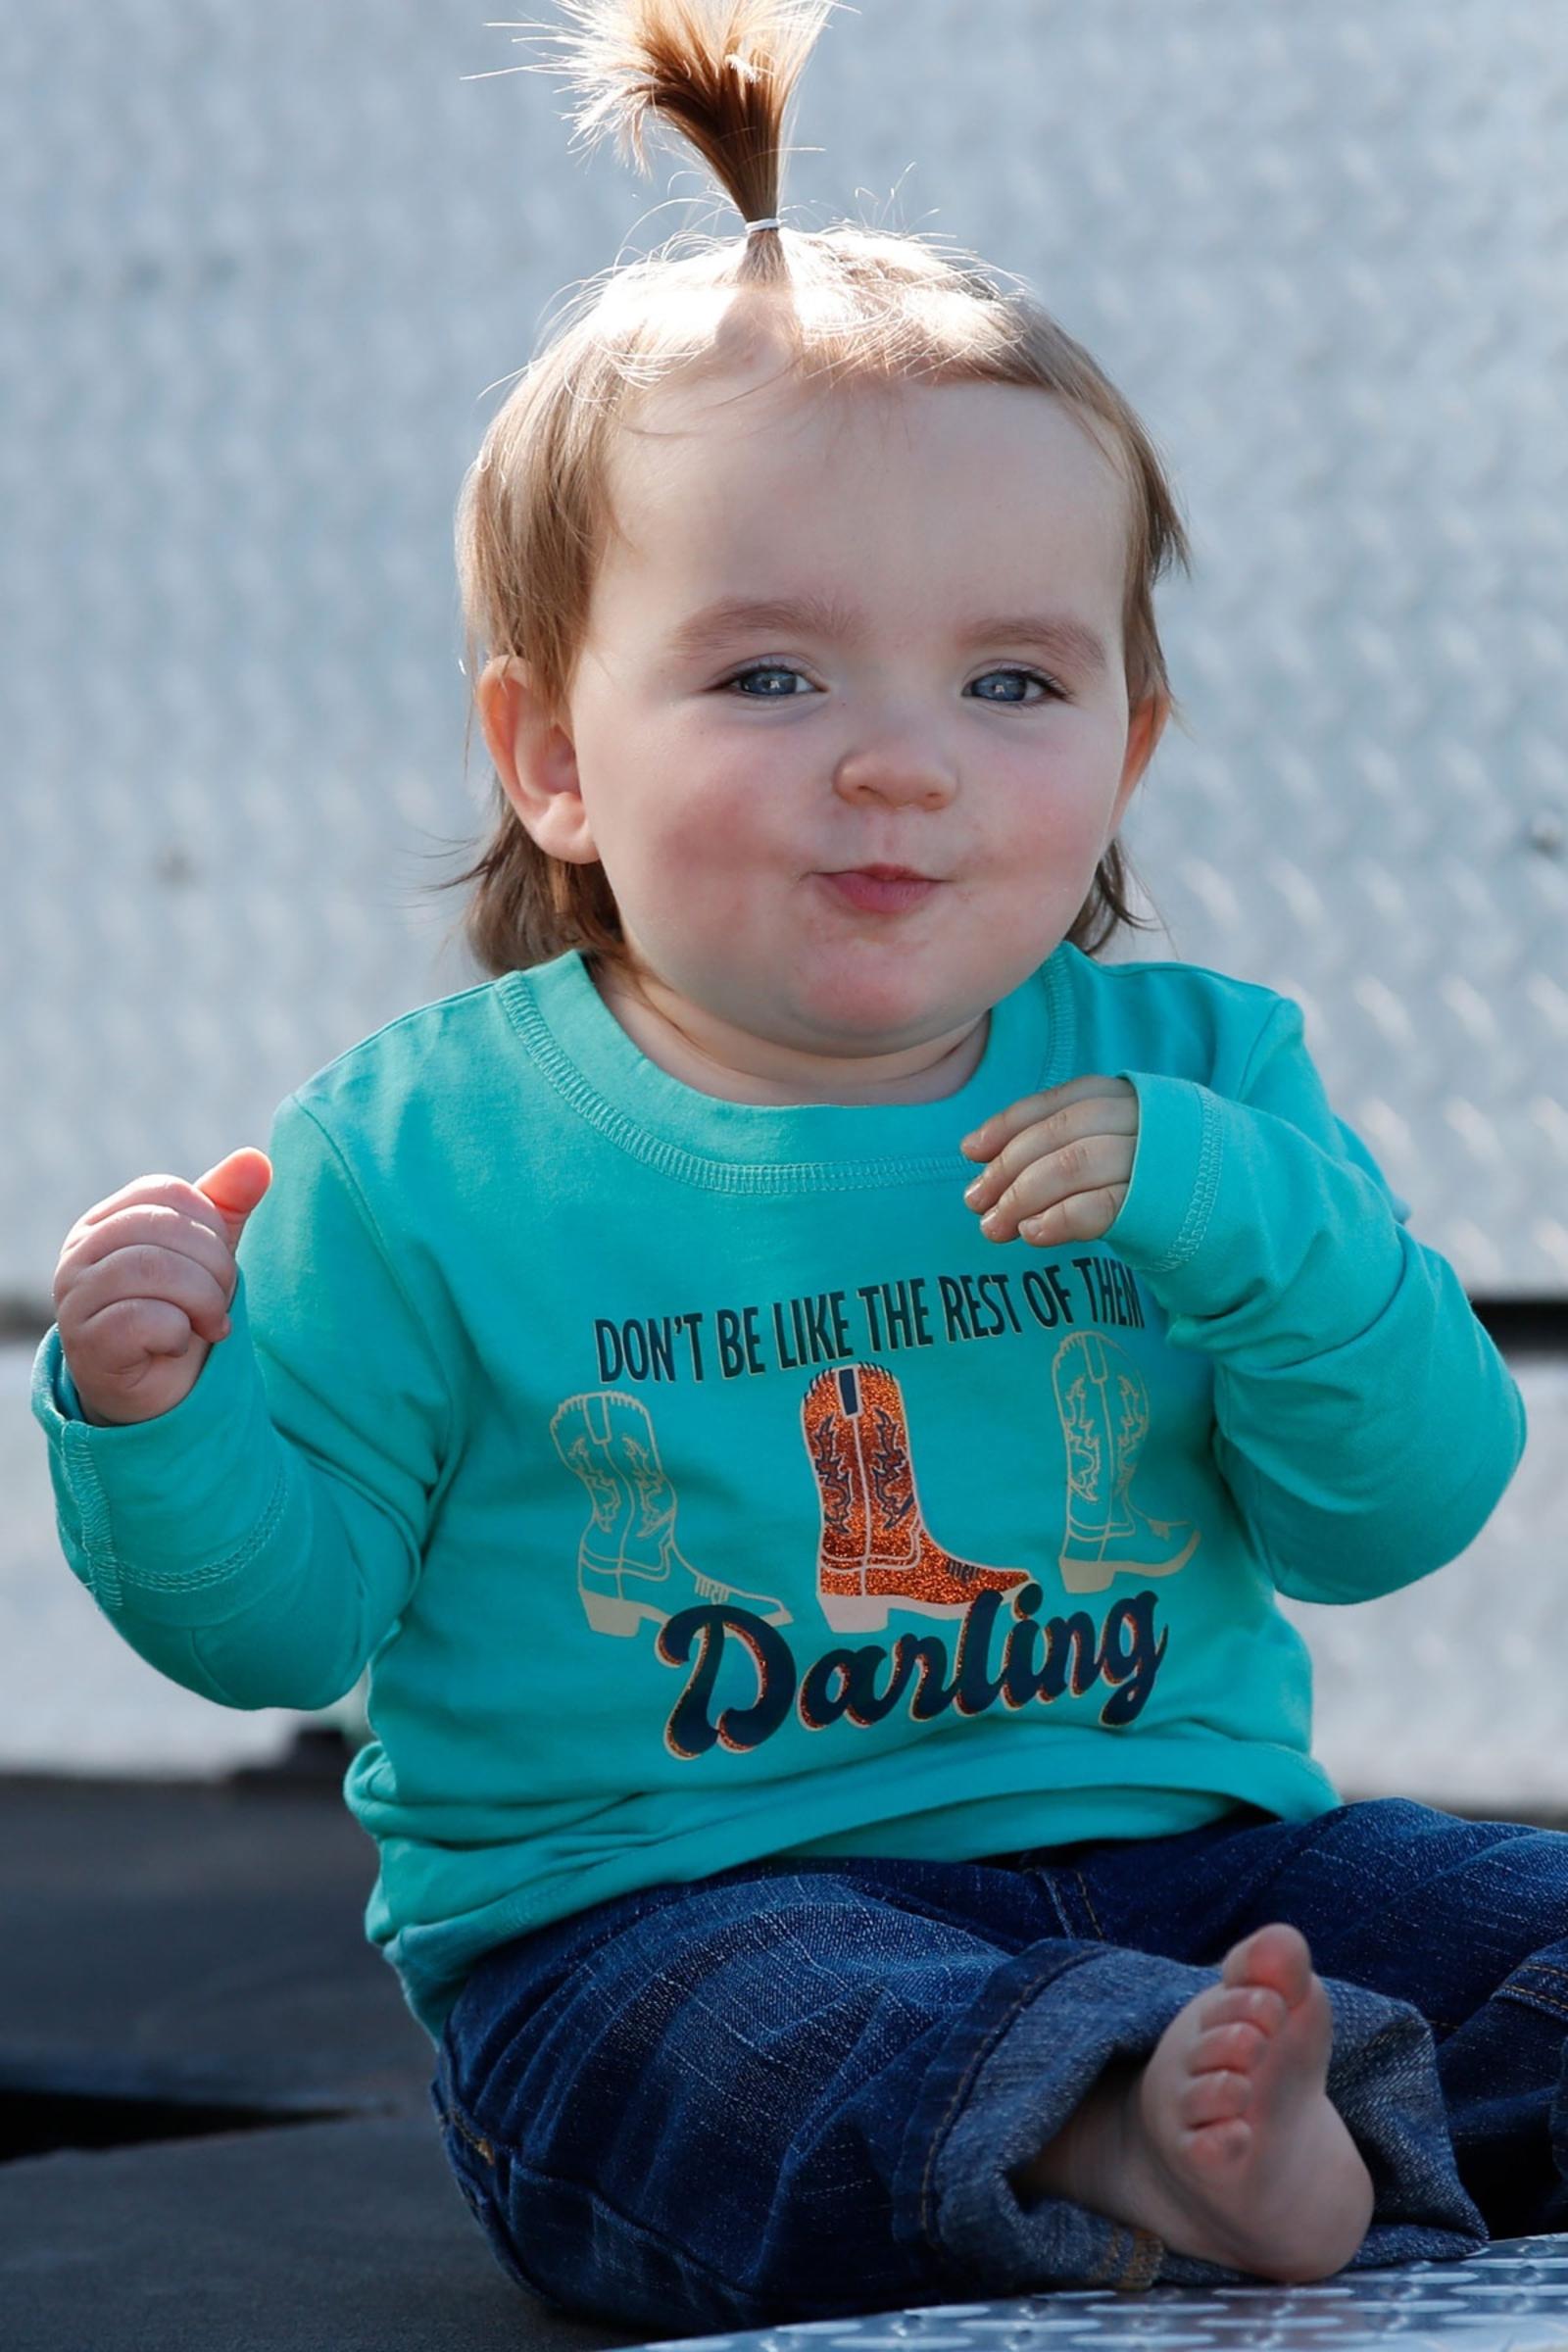 Toddler Don't Be Like The Rest Of Them Darling Long Sleeve Tee - Turquoise LIFESTYLE VIEW